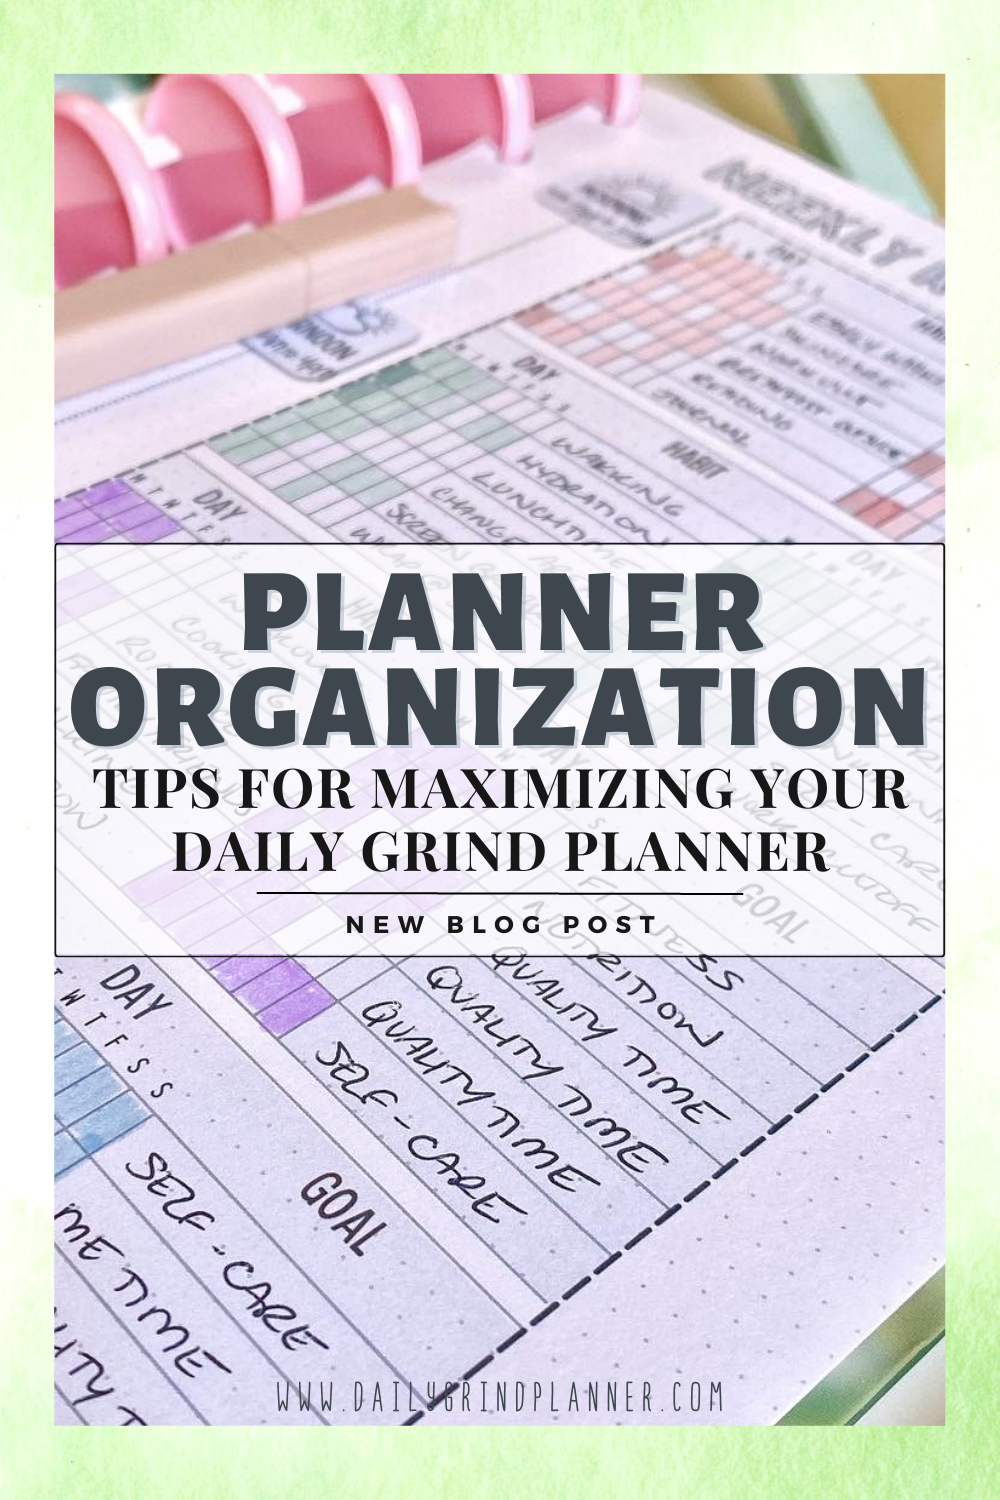 PLANNER ORGANIZATION: TIPS FOR MAXIMIZING YOUR DAILY GRIND PLANNER